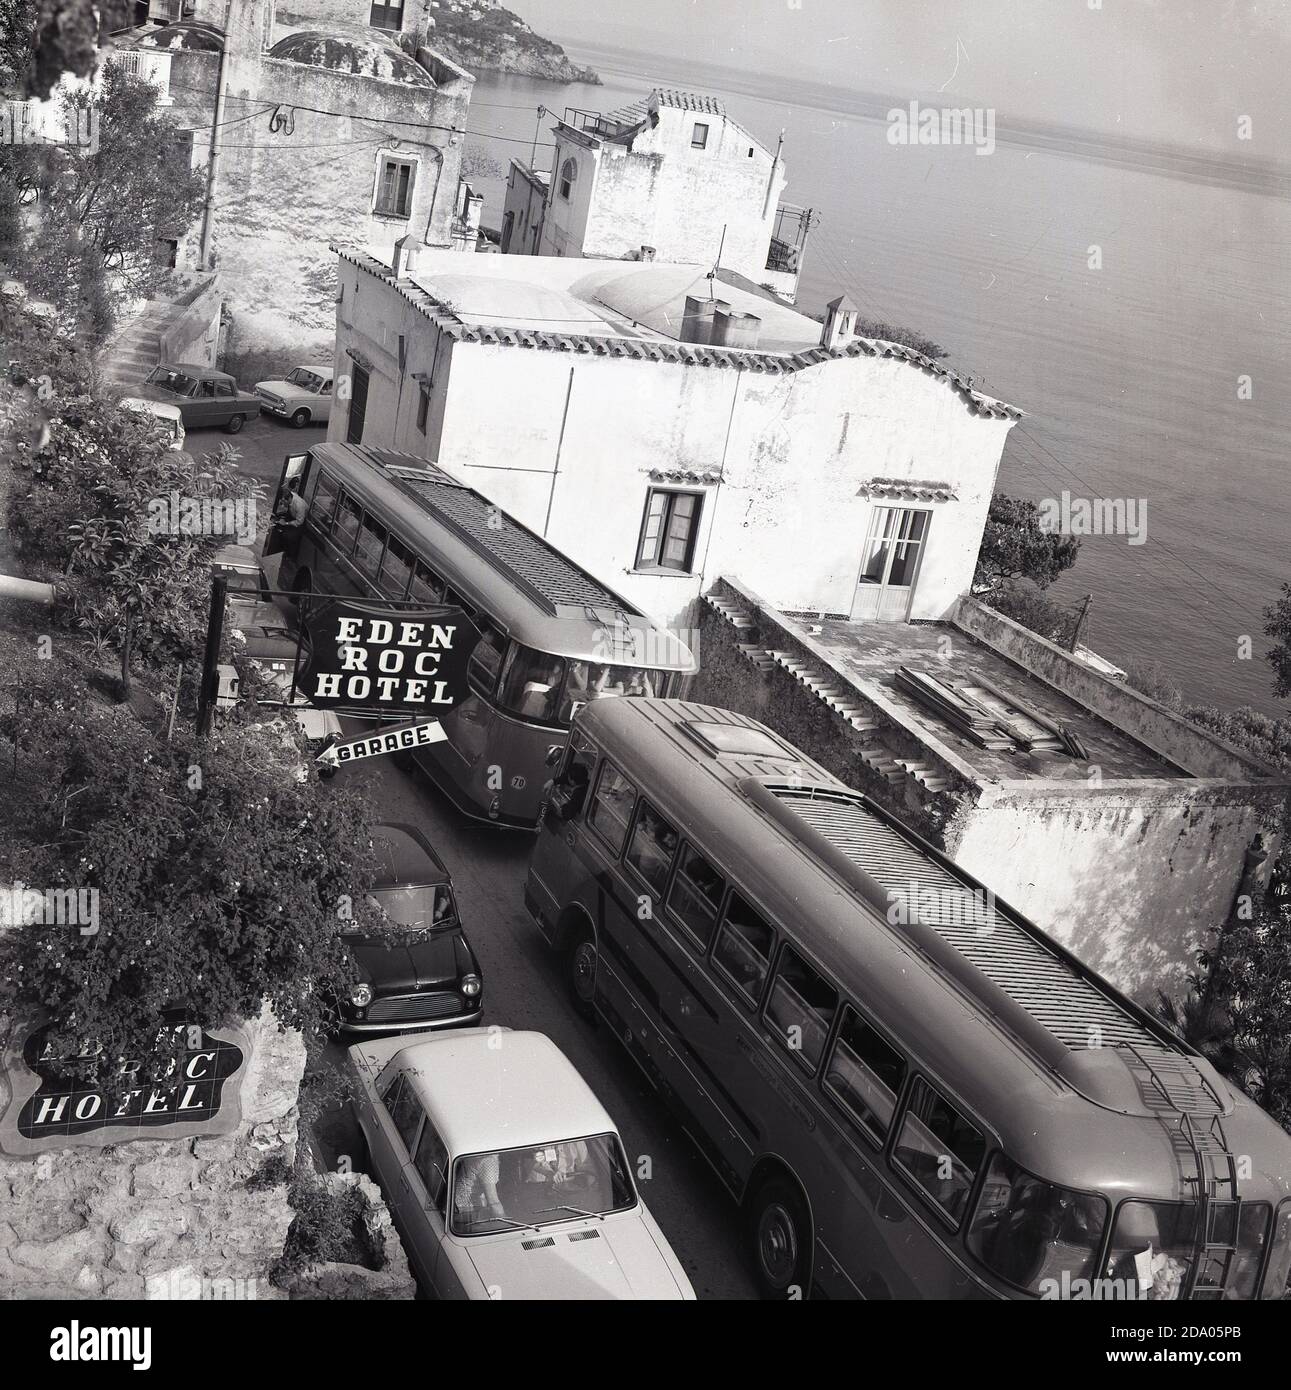 1970, historical, outside the Eden Roc Hotel and overlooking the Tyrrhenian Sea, cars squeeze pass tourist coaches parked on the narrow mountain road at Positano, on the popular Amalfi coast, Italy. Stock Photo